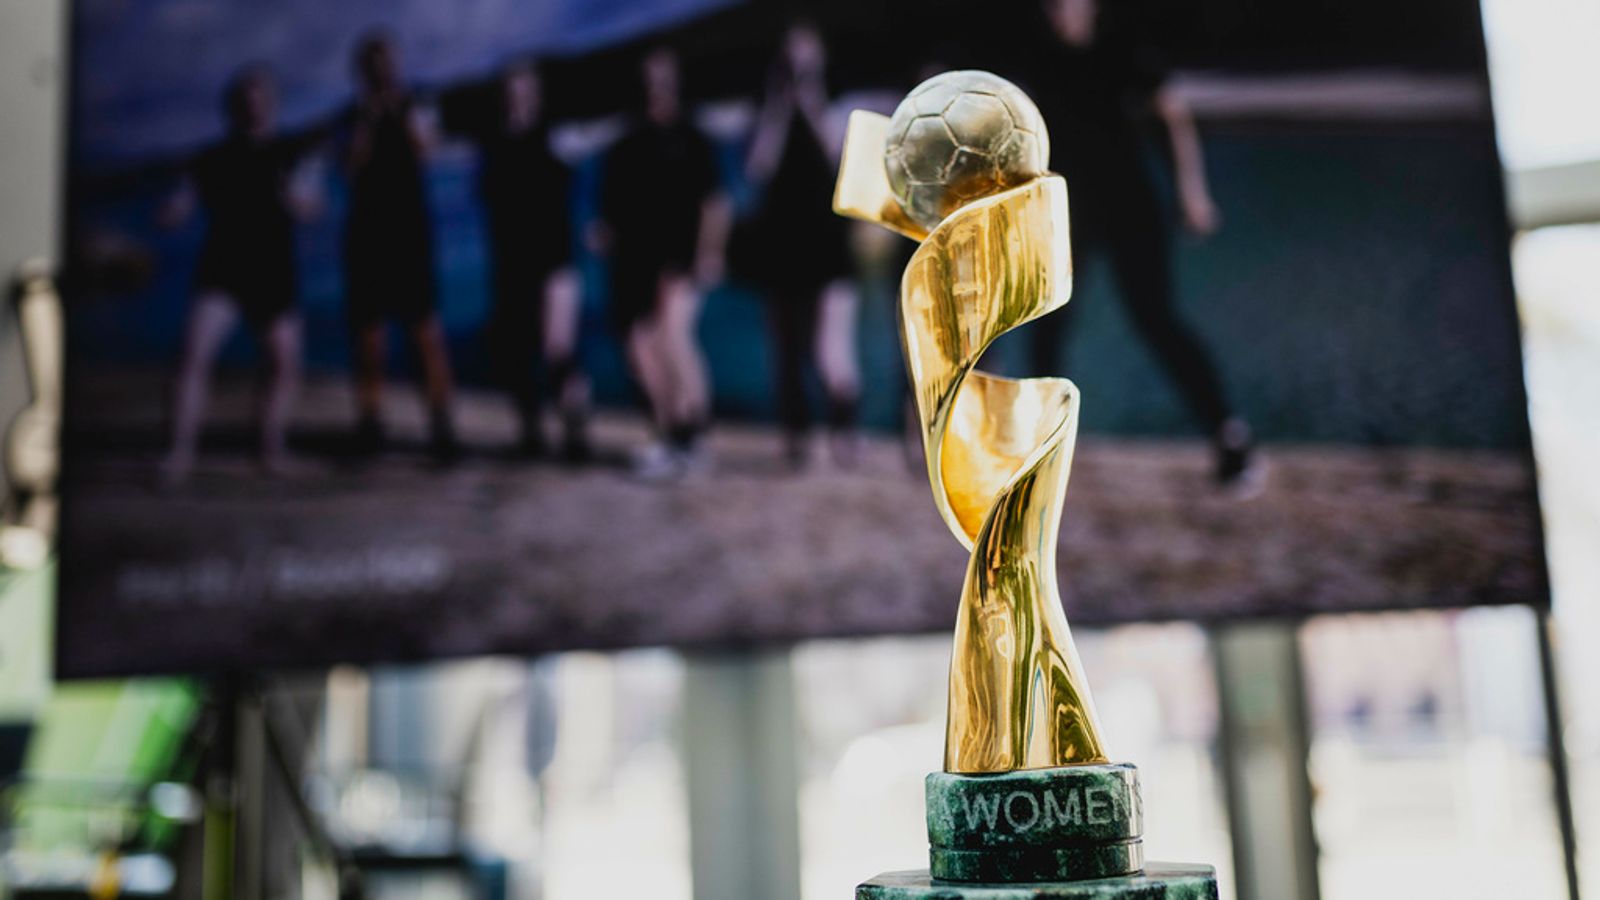 UK and other European nations call on FIFA and broadcasters to 'quickly reach an agreement' to show Women's World Cup